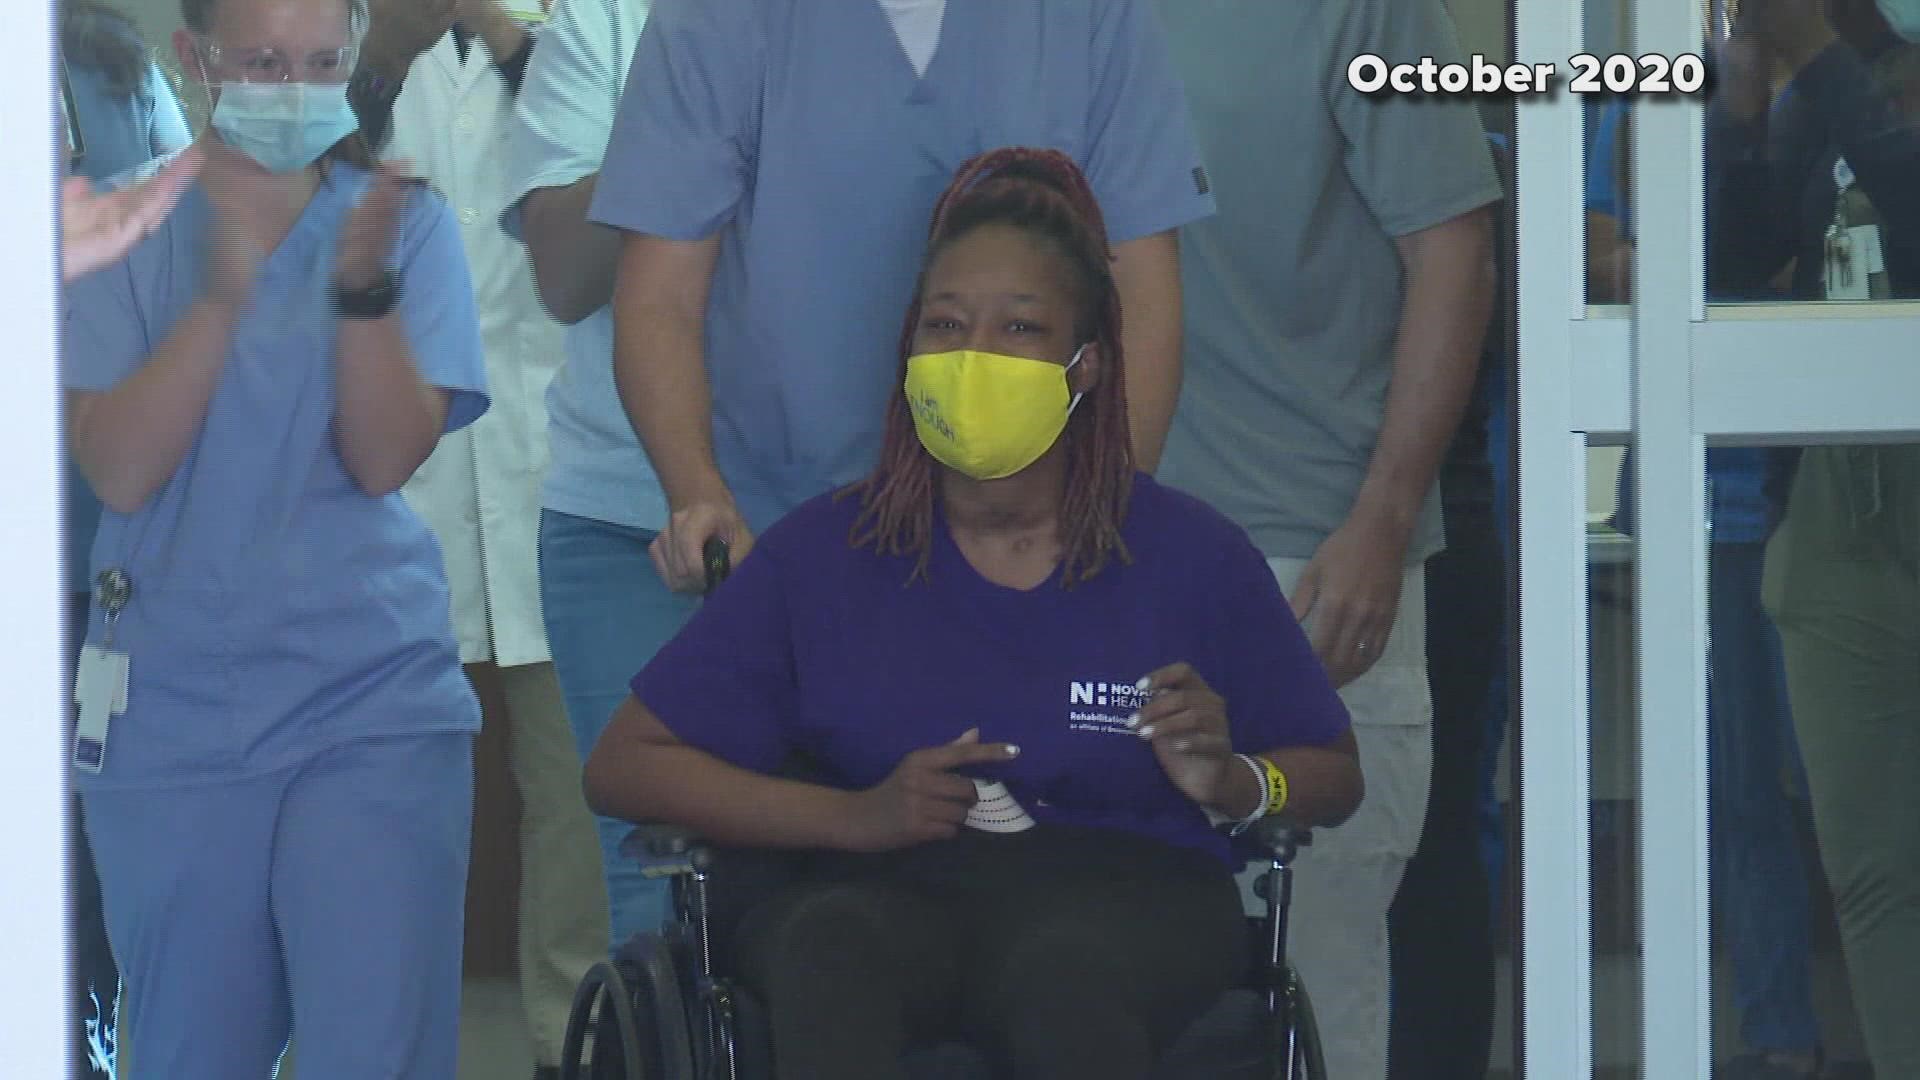 Tionna Hairston is sent home to a crowd of cheers after 6 months in the hospital fighting COVID